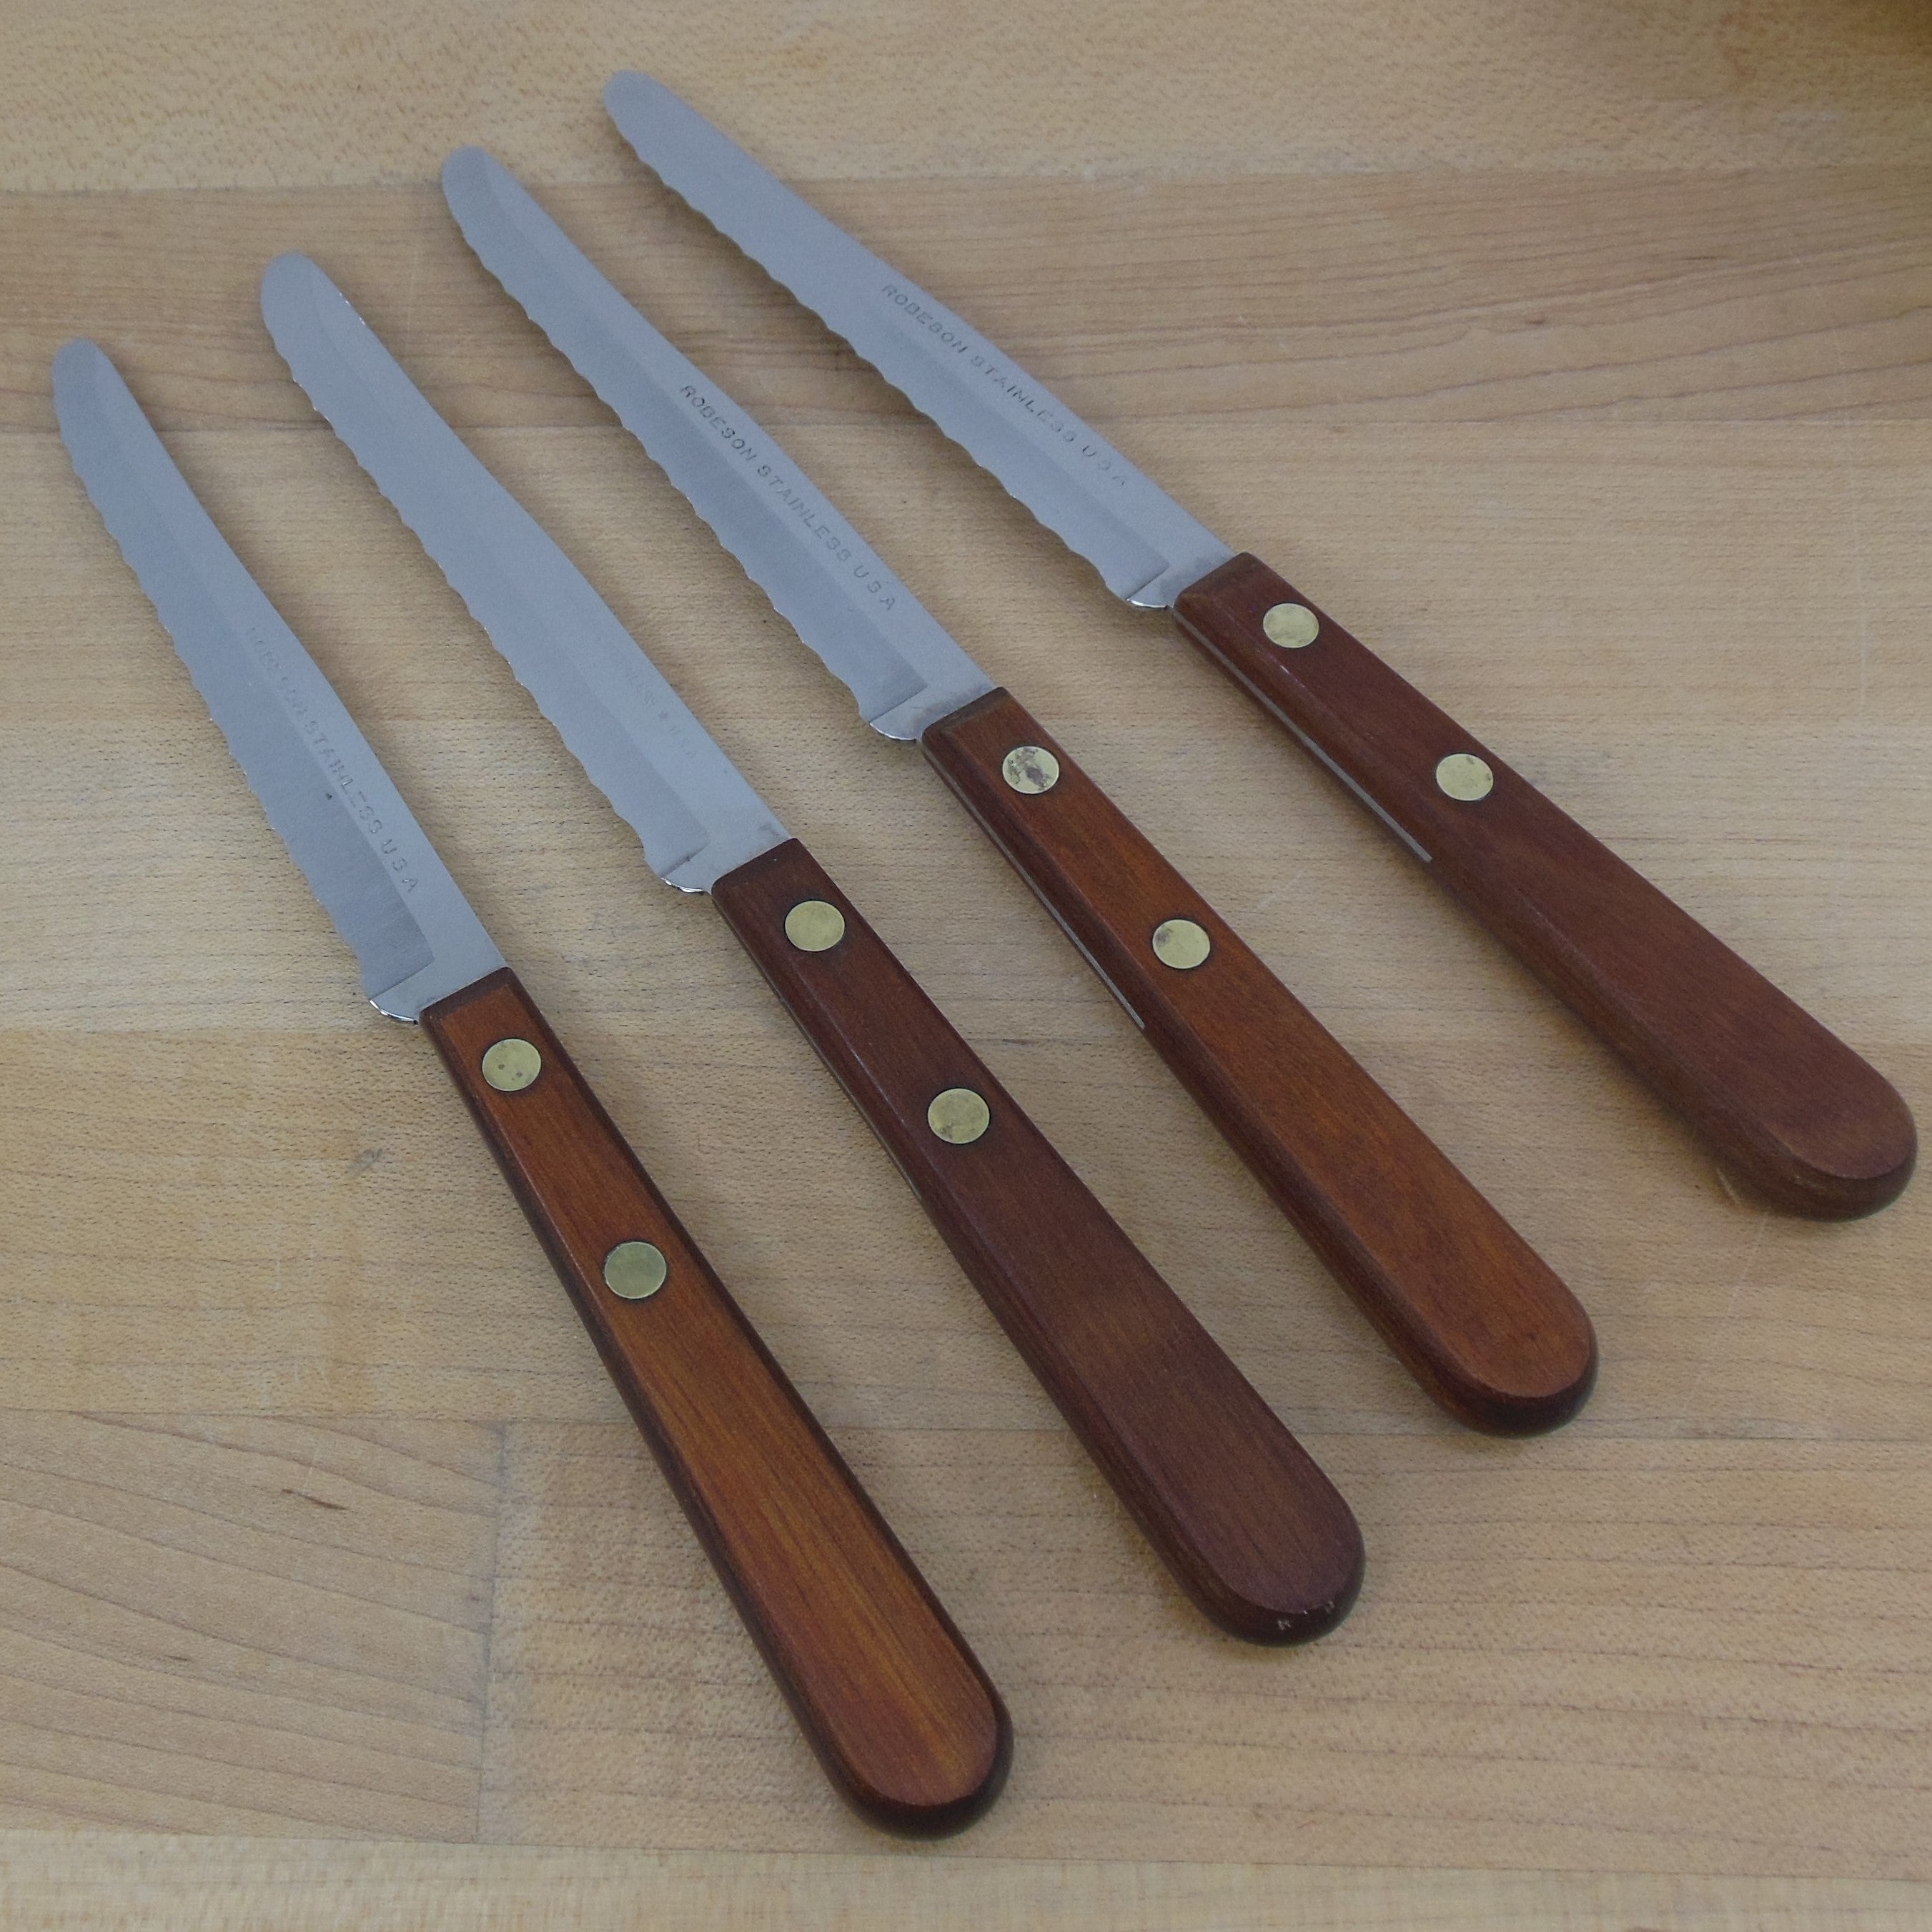 Vtg 4 Carravelle by Robeson 9 Serrated Steak Knives w/ Wood Handles Japan